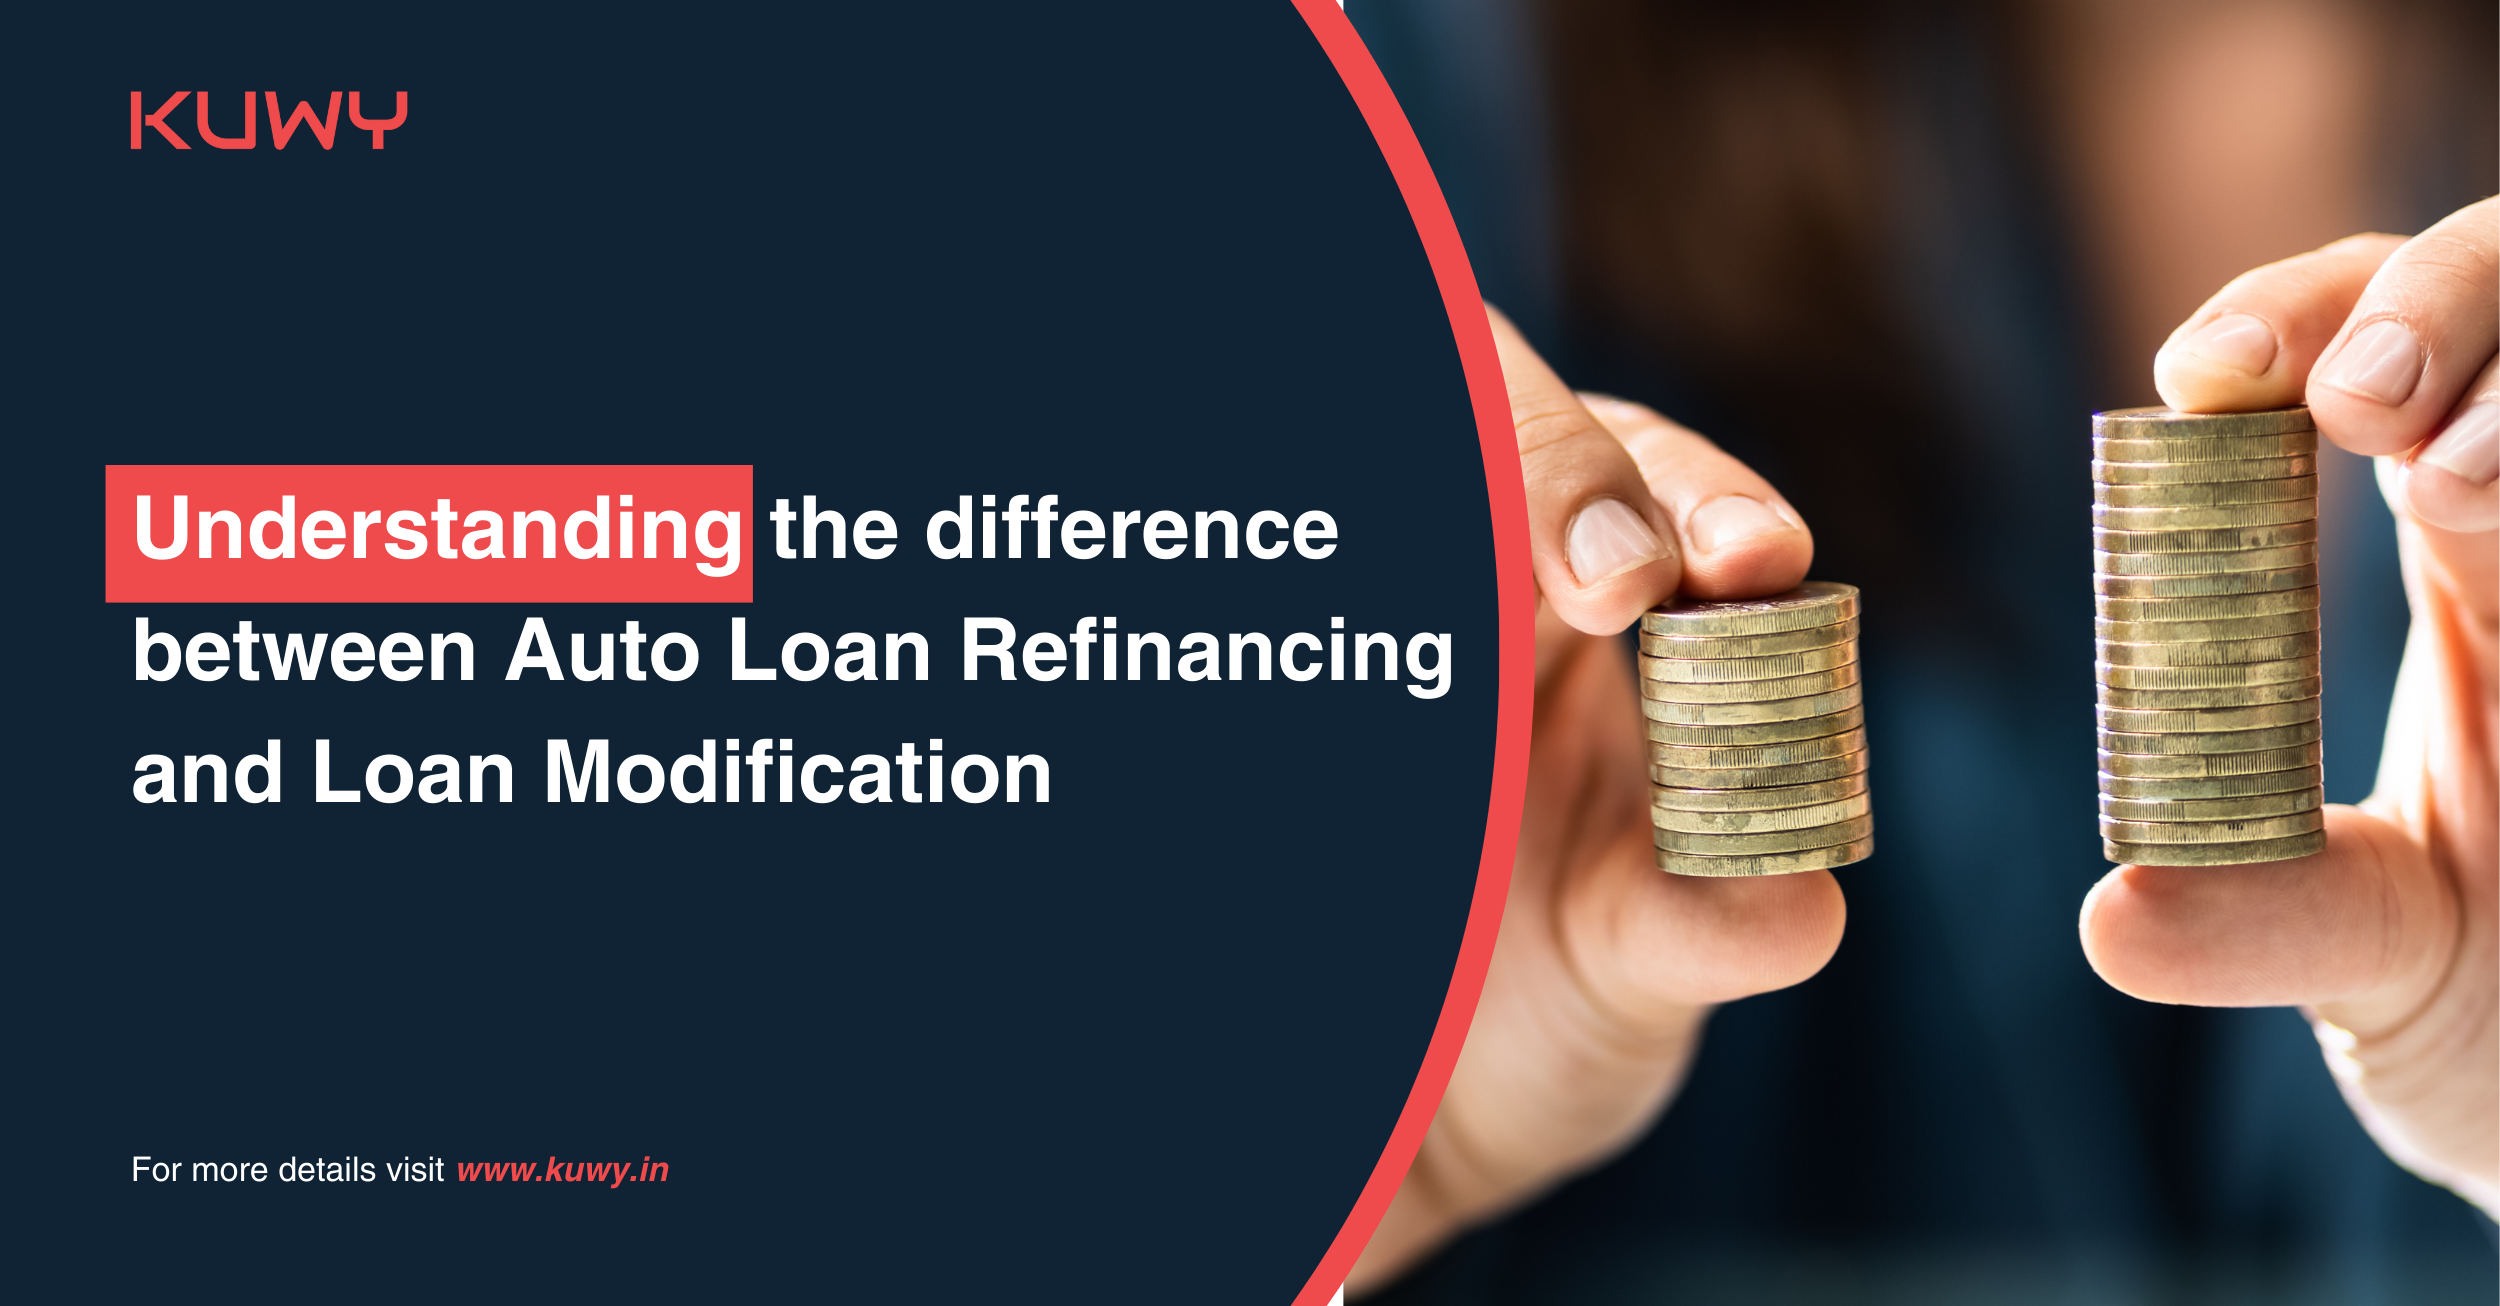 Understanding the difference between Auto Loan Refinancing and Loan Modification